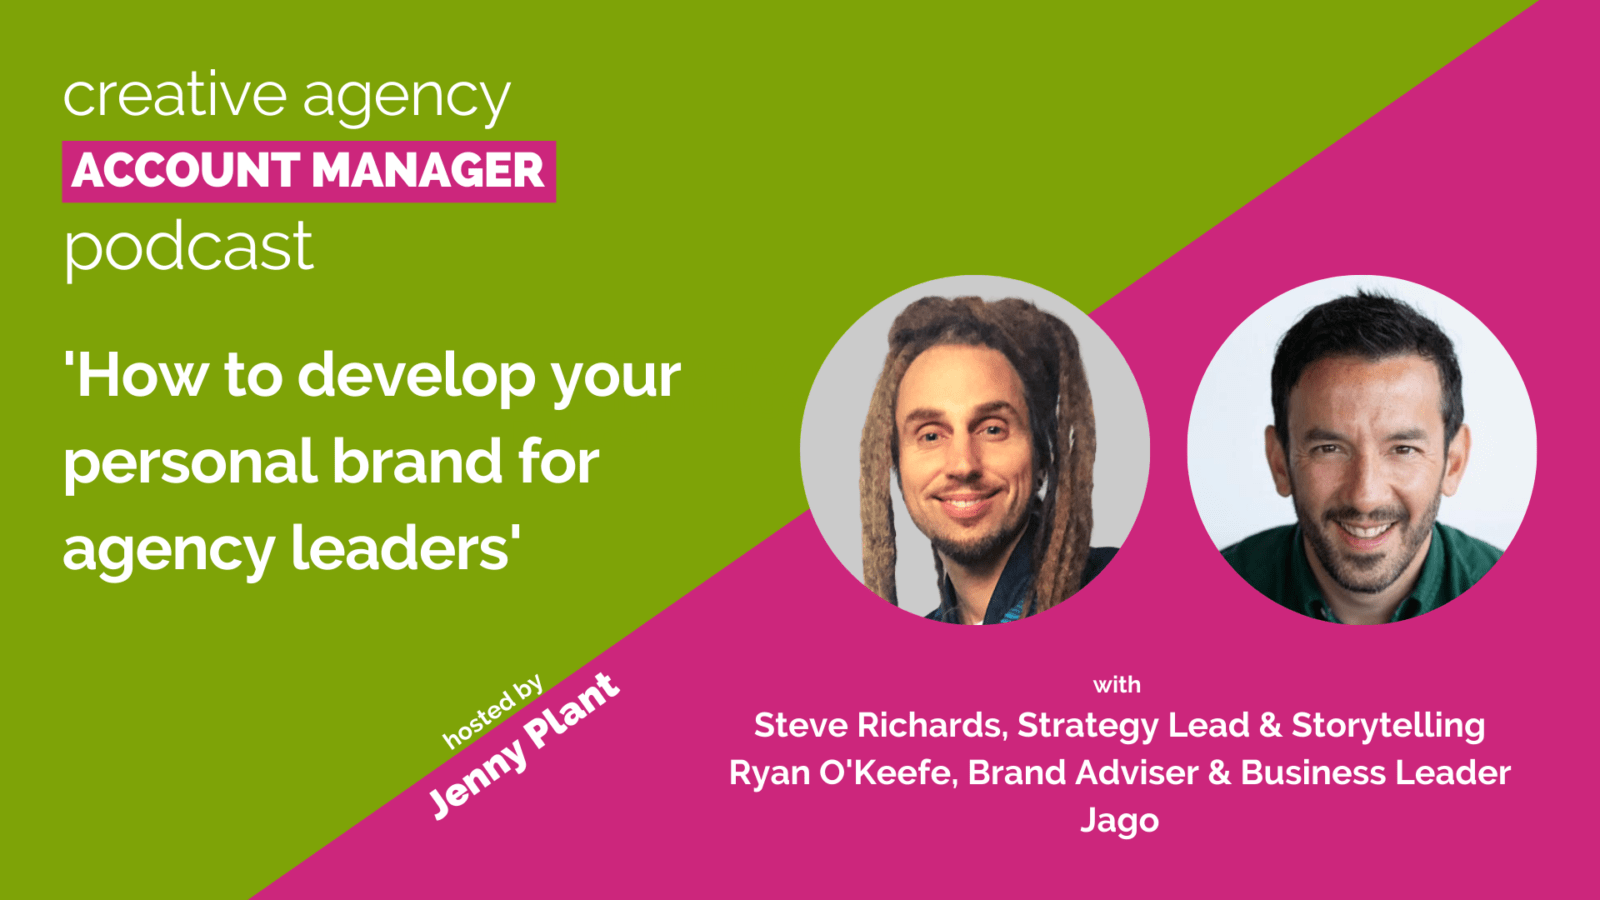 How to develop your personal brand for agency leaders with Steve Richards and Ryan O’Keefe